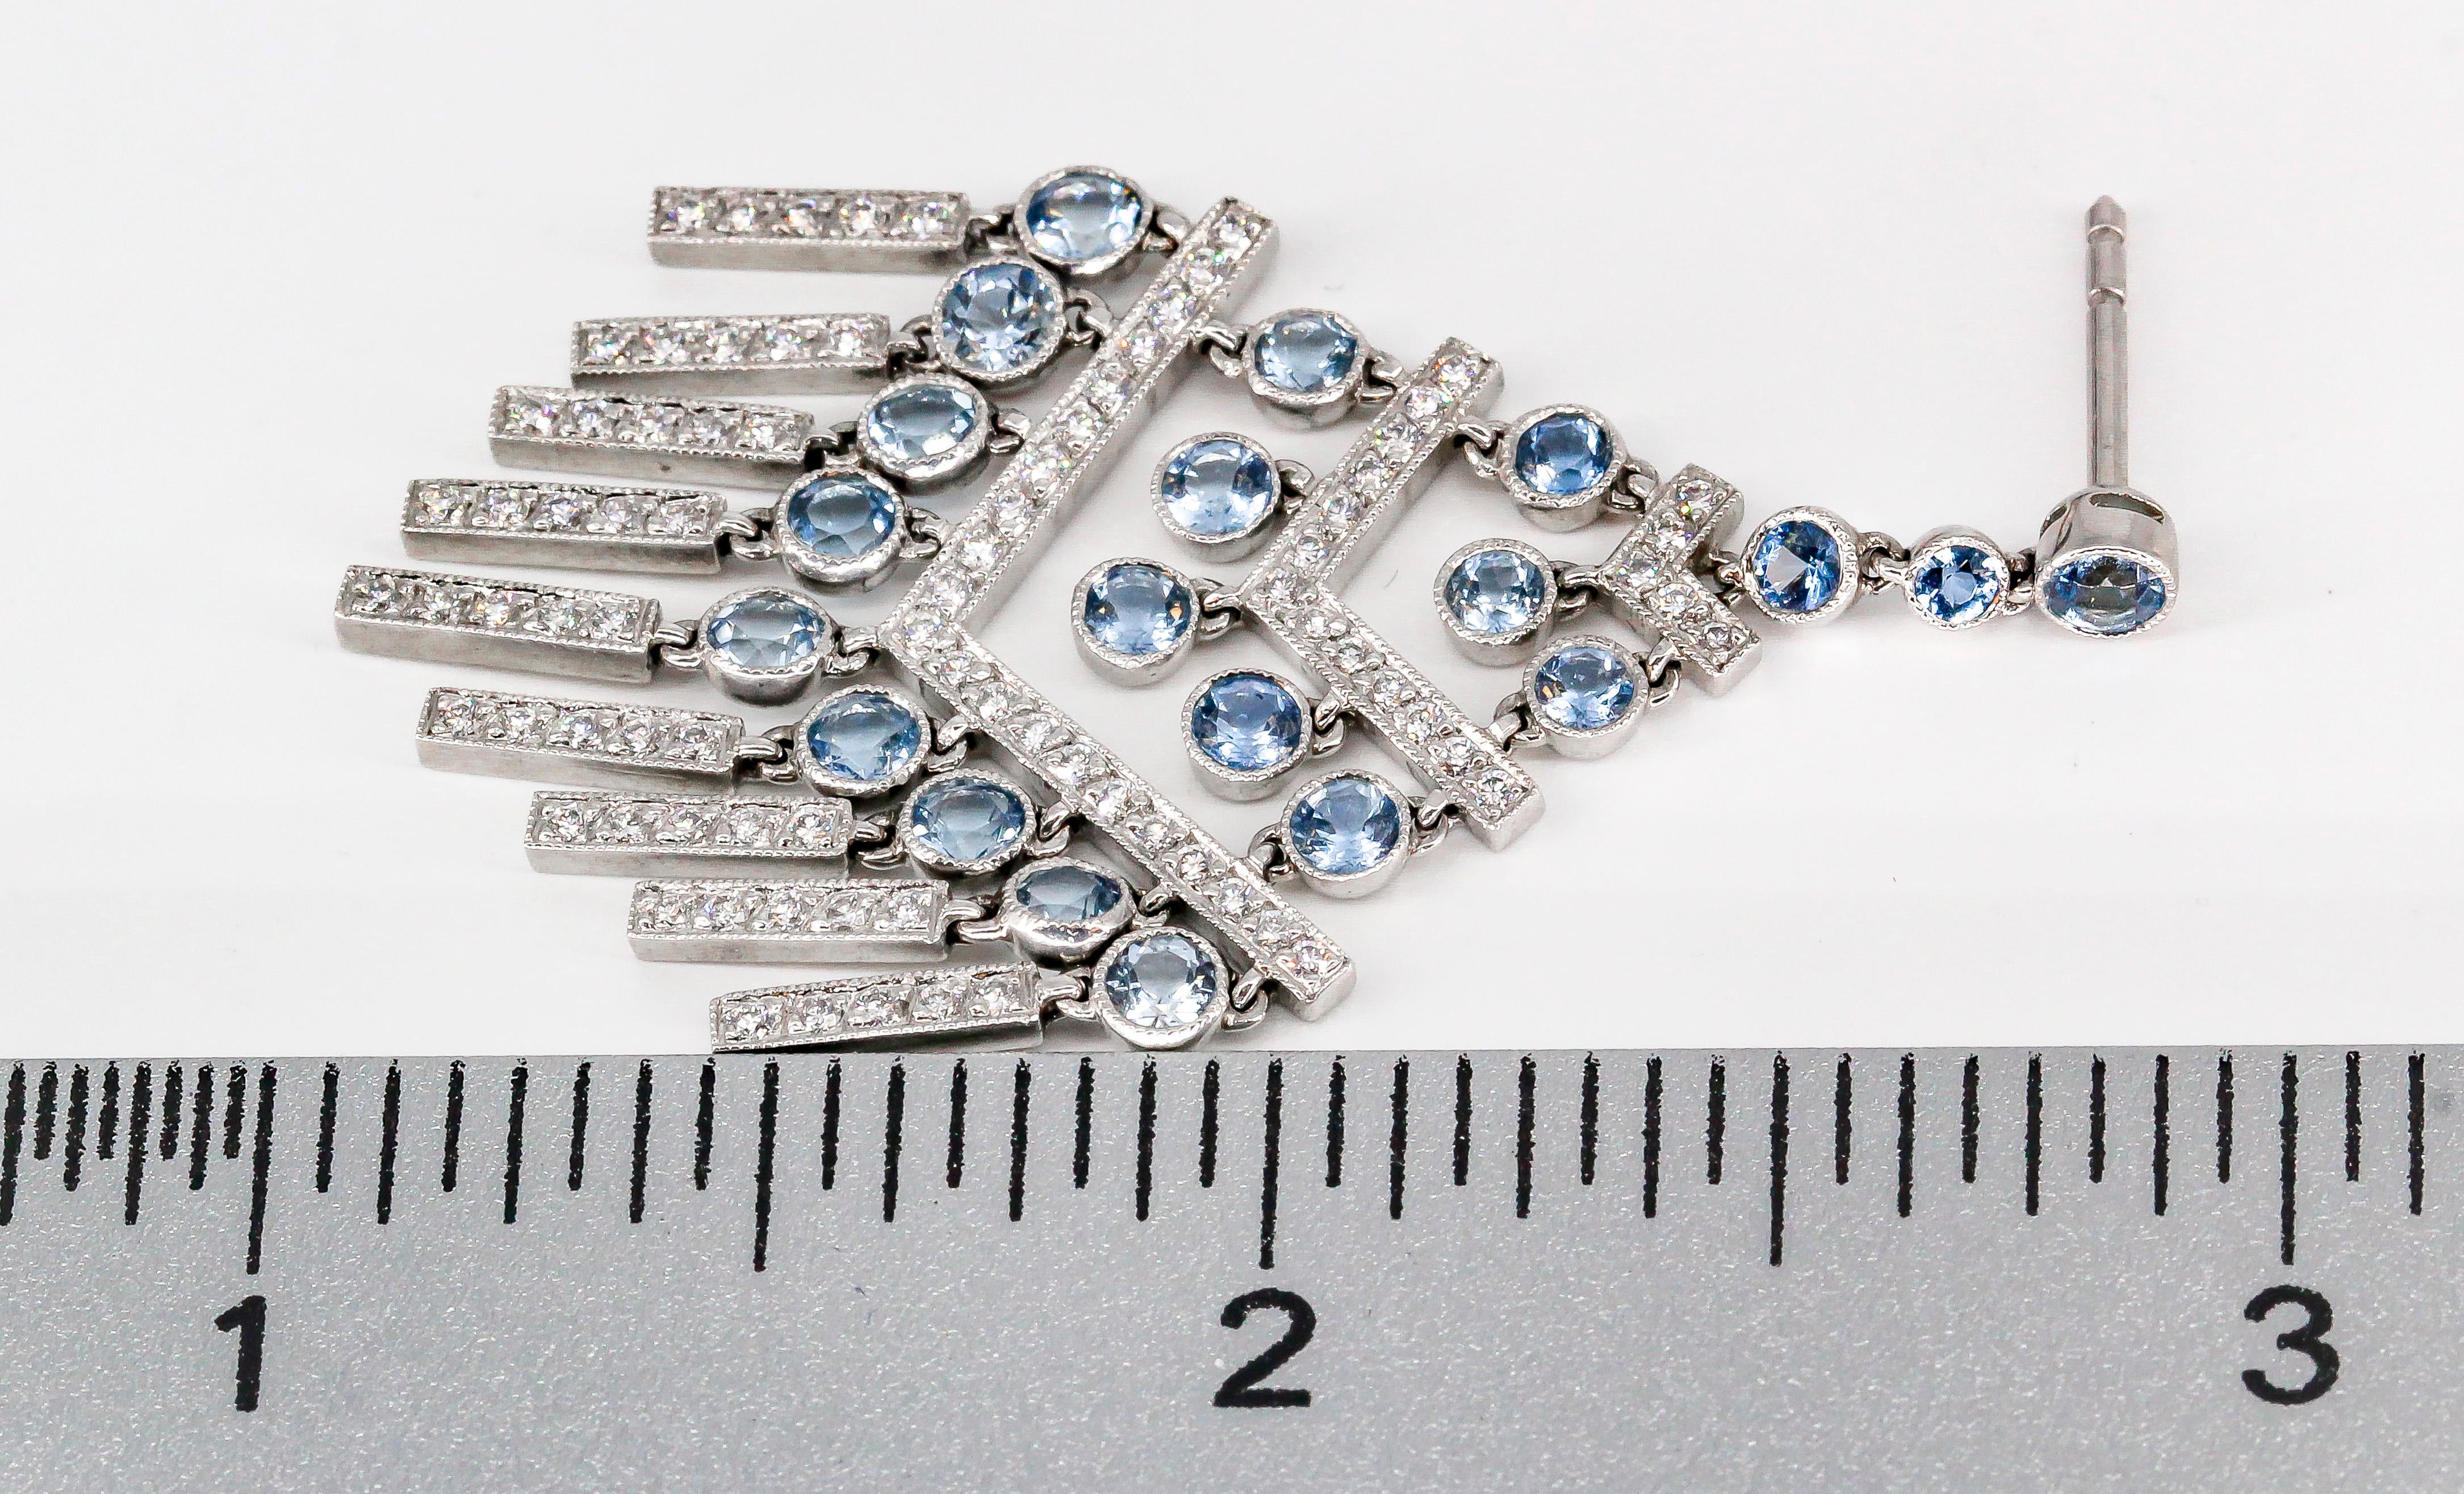 Tiffany & Co. Aquamarine Diamond and Platinum Chevron Chandelier Fringe Earrings In Excellent Condition For Sale In Bellmore, NY